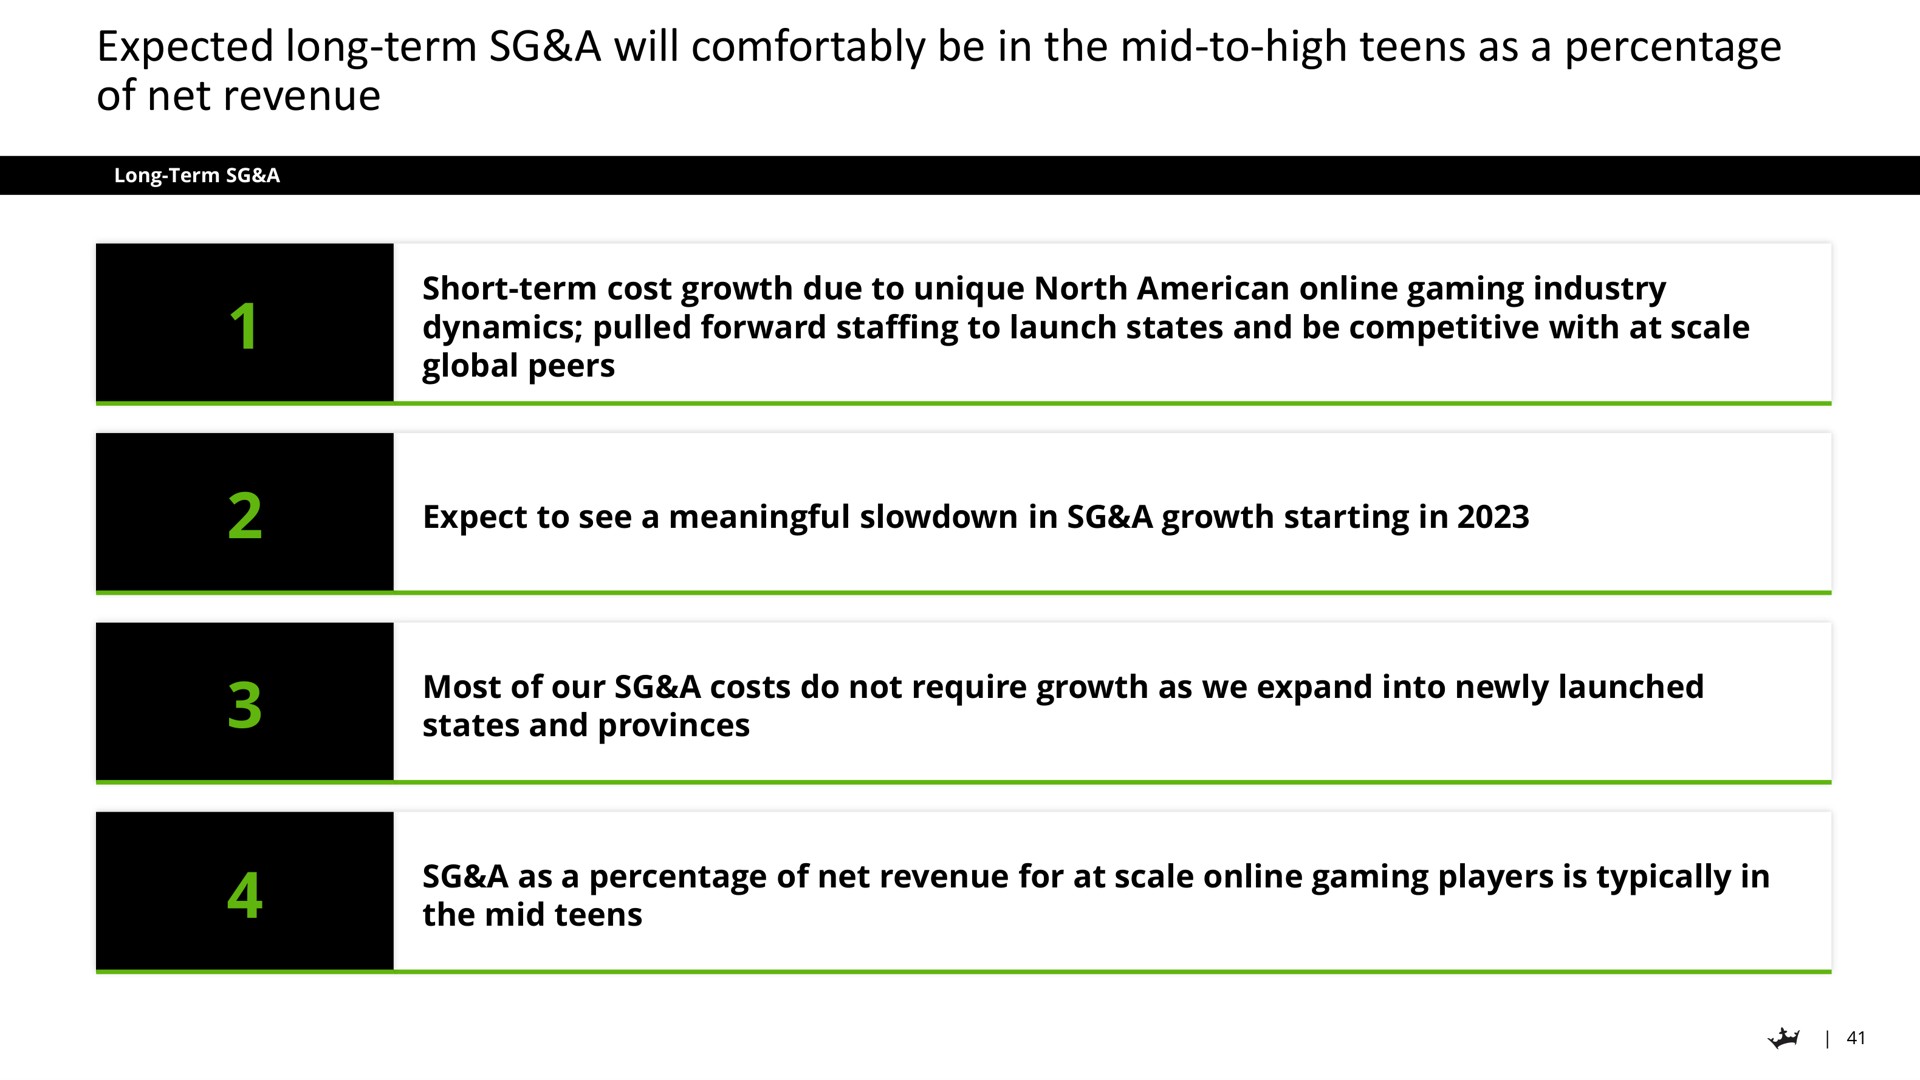 expected long term a will comfortably be in the mid to high teens as a percentage of net revenue short term cost growth due to unique north gaming industry dynamics pulled forward staffing to launch states and competitive with at scale global peers expect to see meaningful slowdown growth starting most our costs do not require growth we expand into newly launched states and provinces for at scale gaming players is typically mid | DraftKings